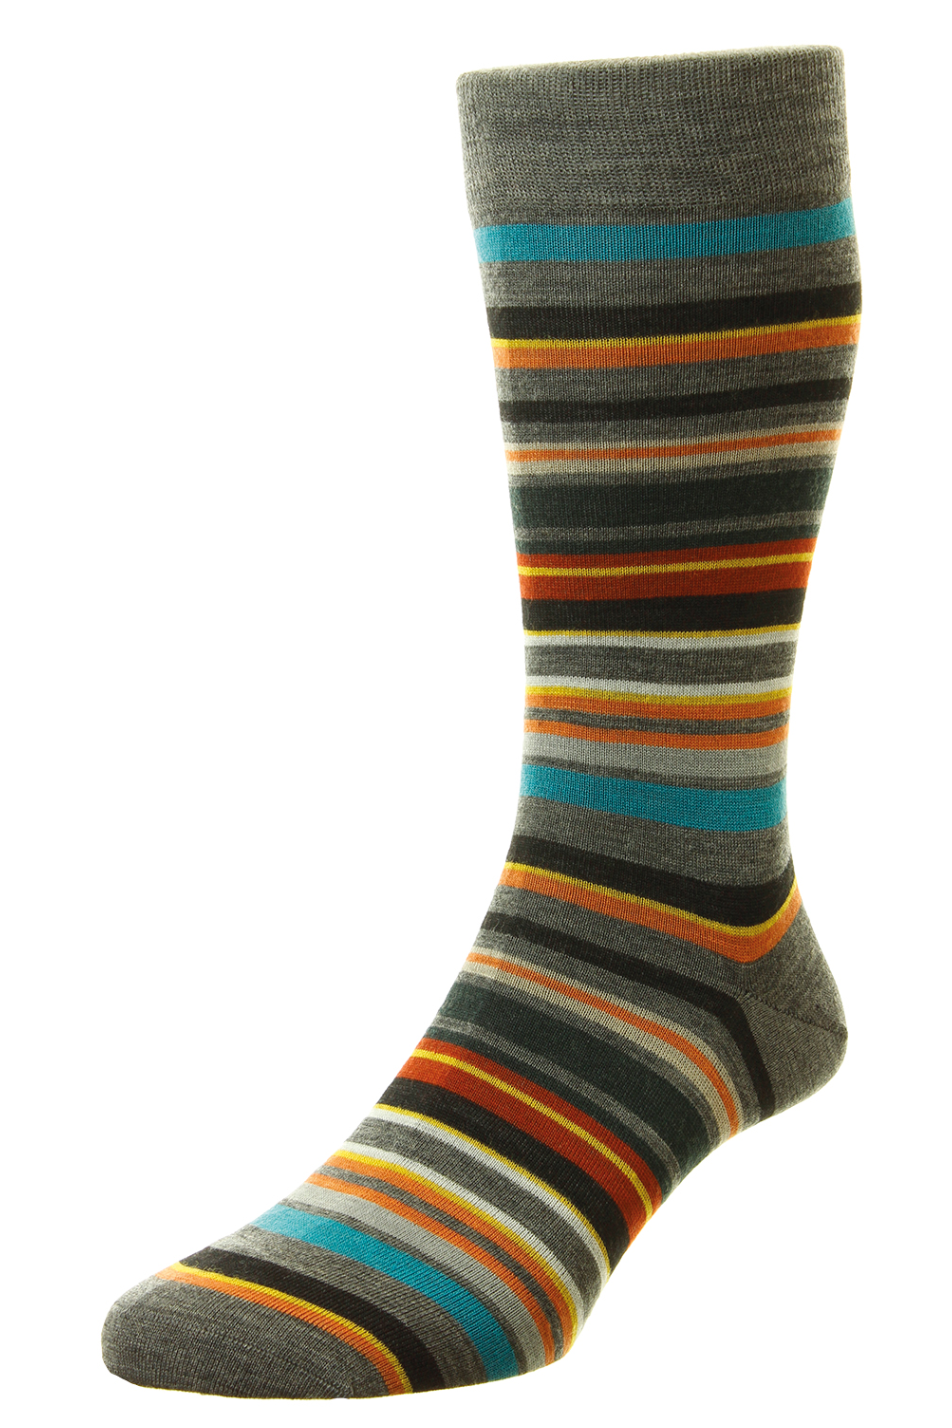 Pantherella Men's Quakers All Over Stripe Sock